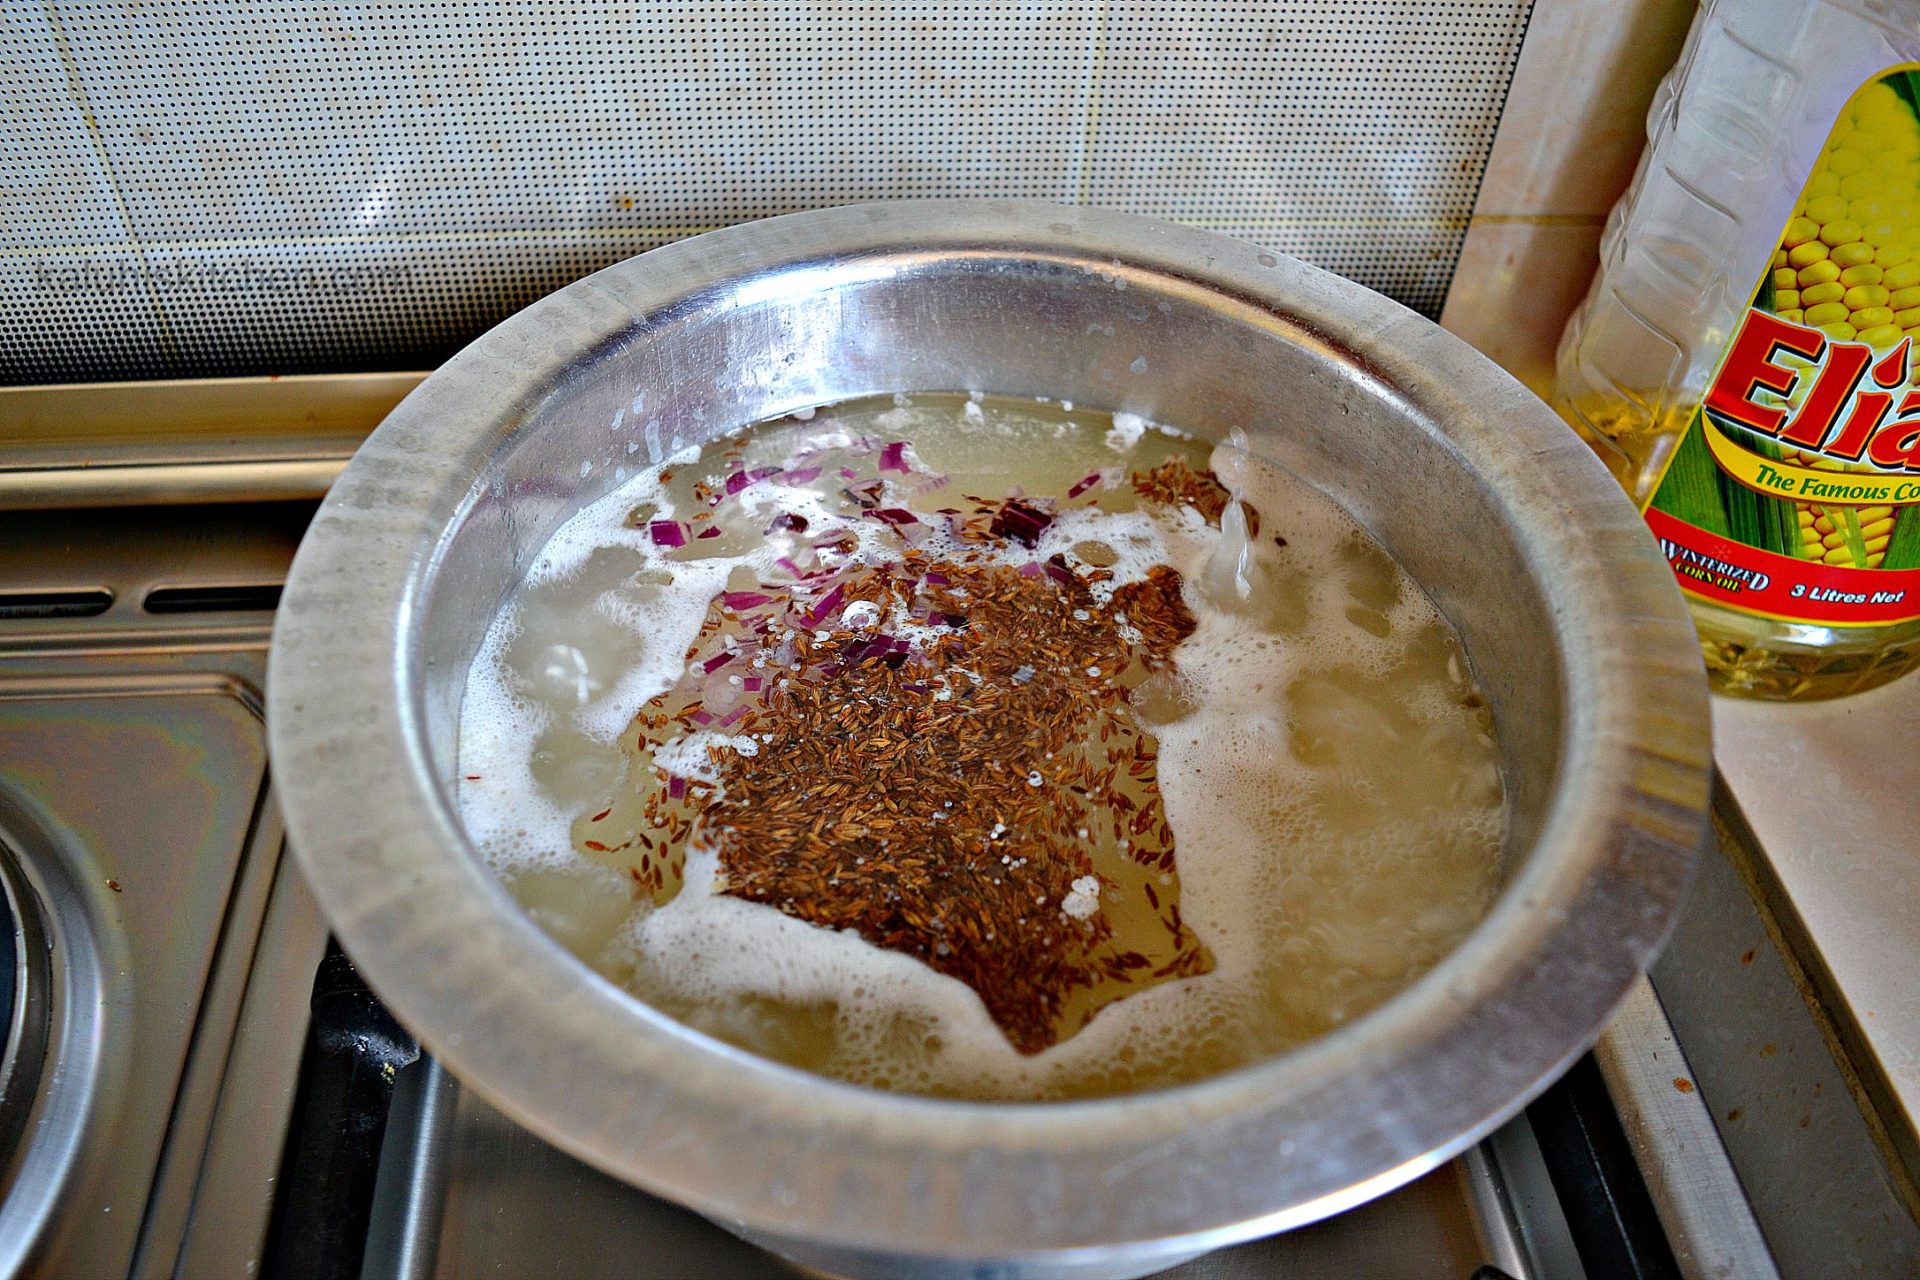 boiling rice with the cumin and red onion tempers the onion taste and softens the cumin_wali wa nazi_kenyan food_kaluhiskitchen.com